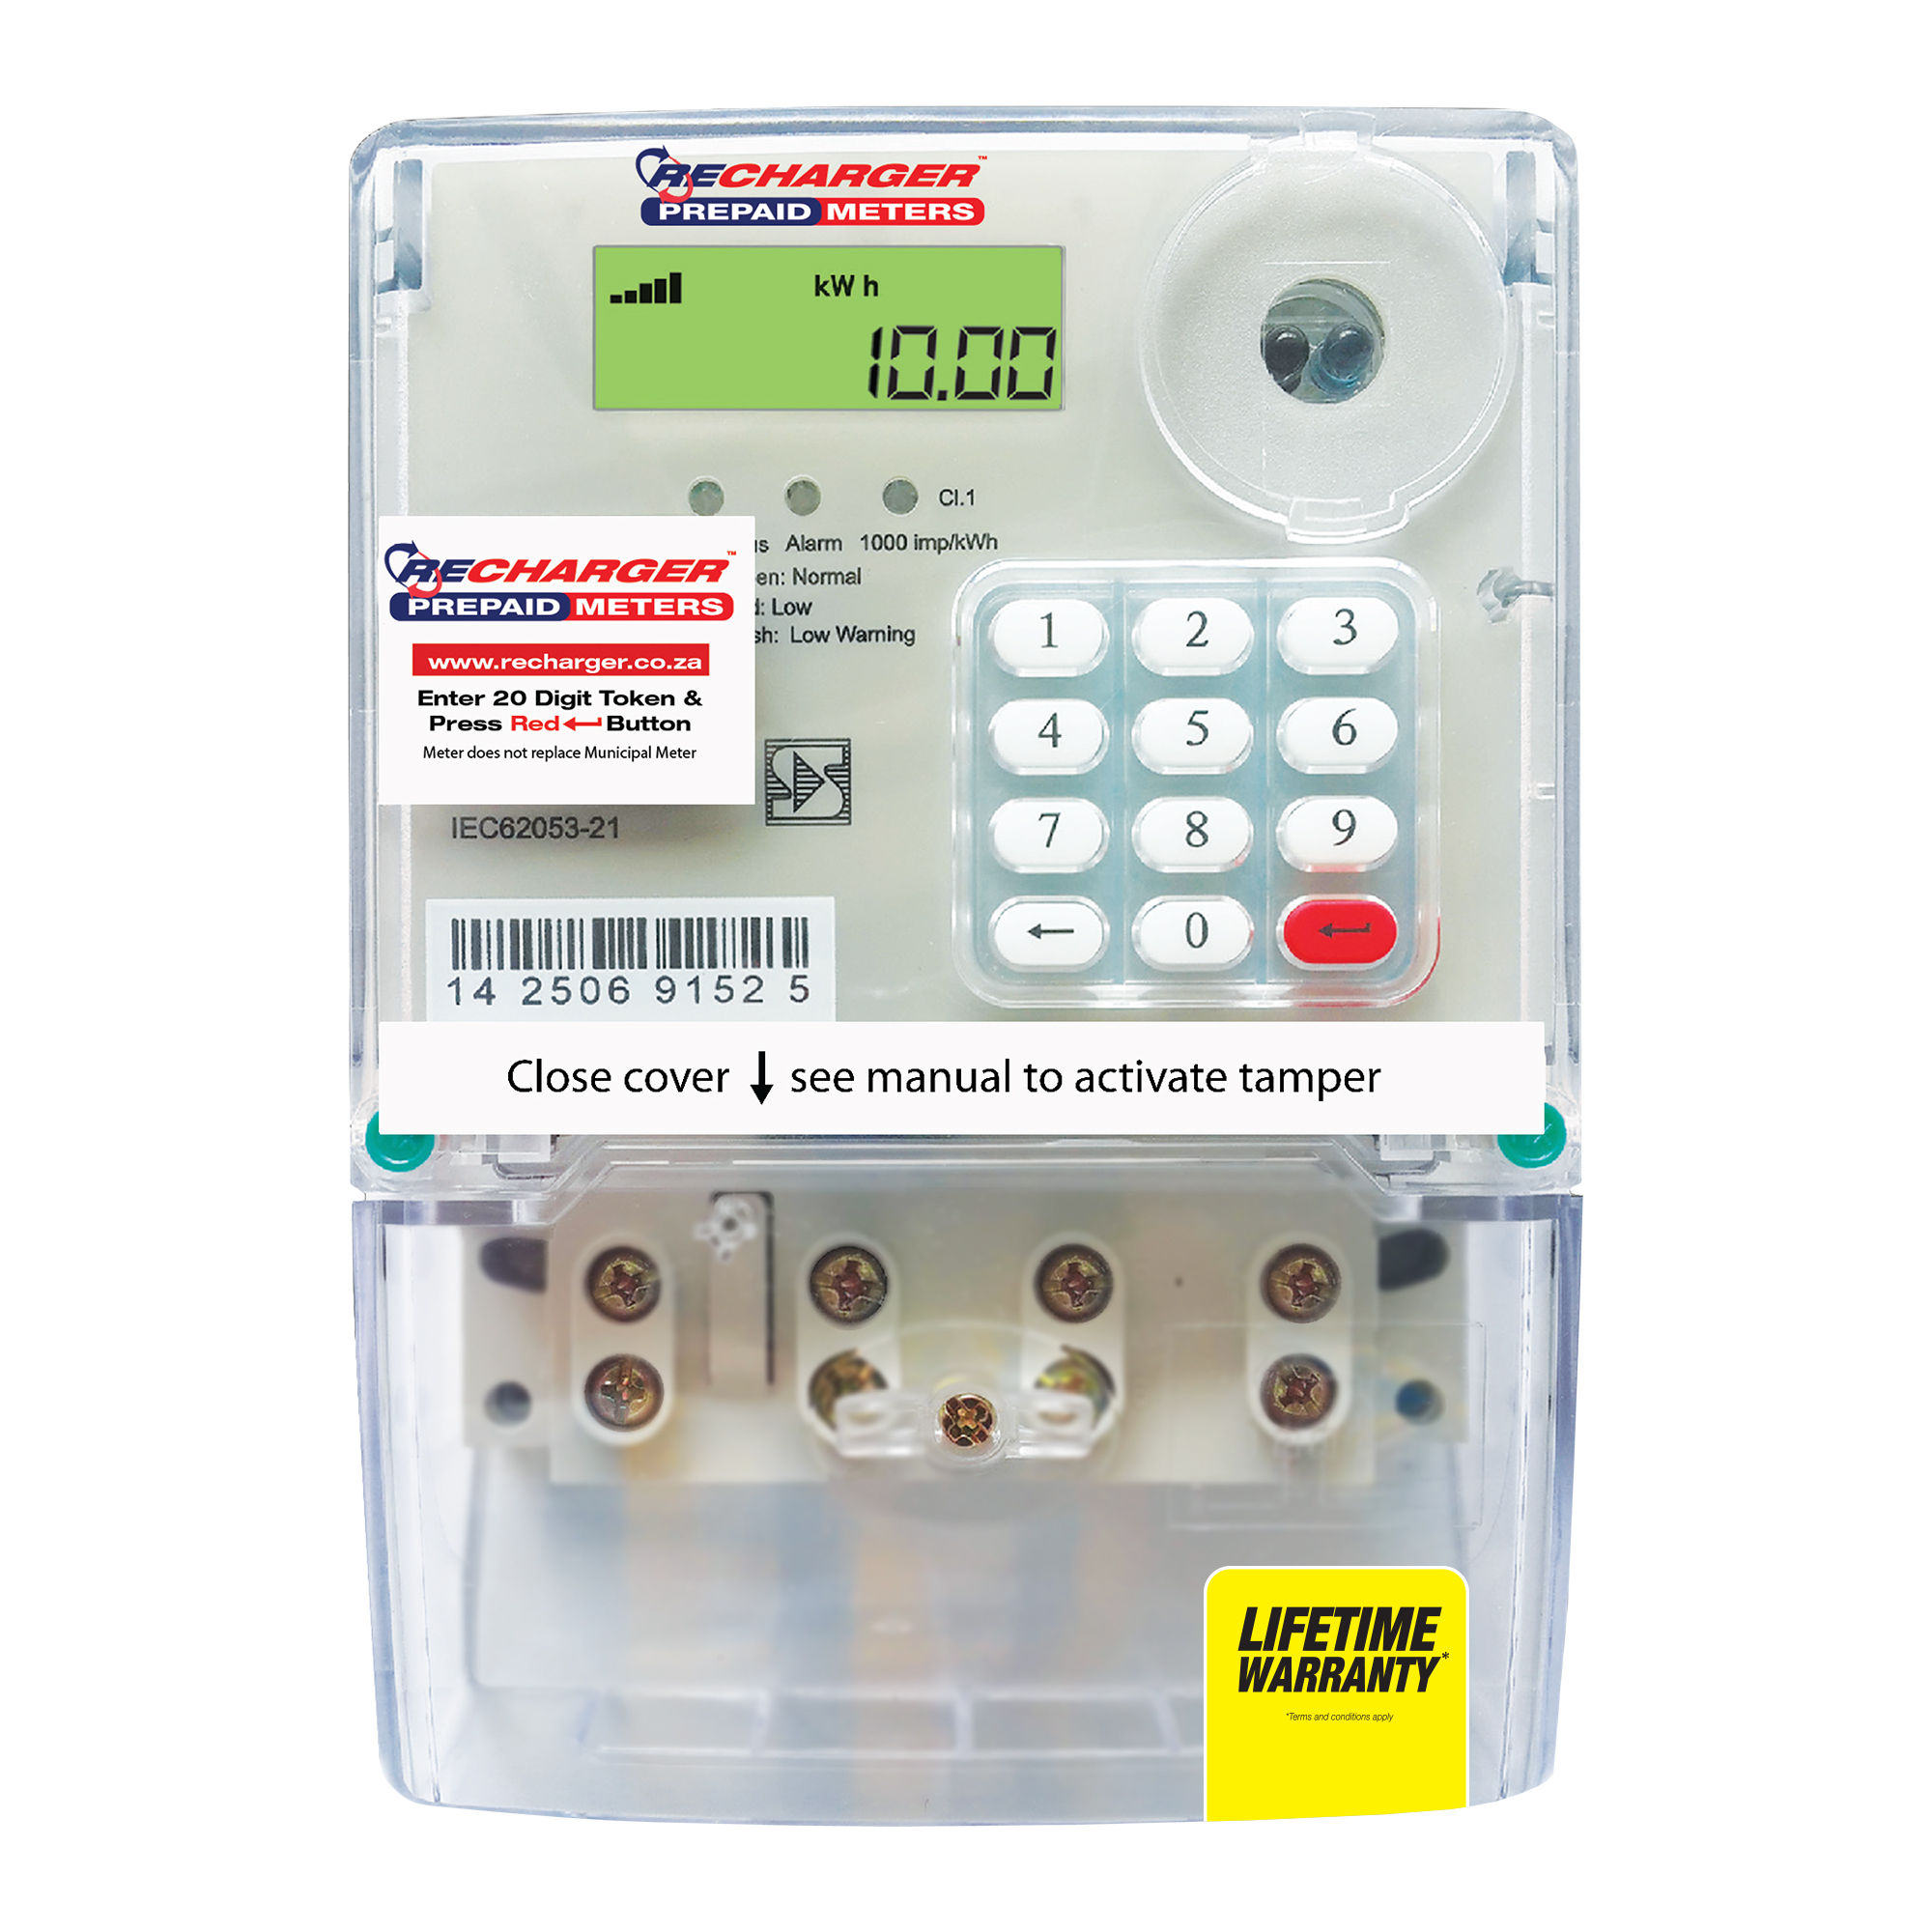 Recharger - Hex Single Phase 80Amp Prepaid Electricity Meter